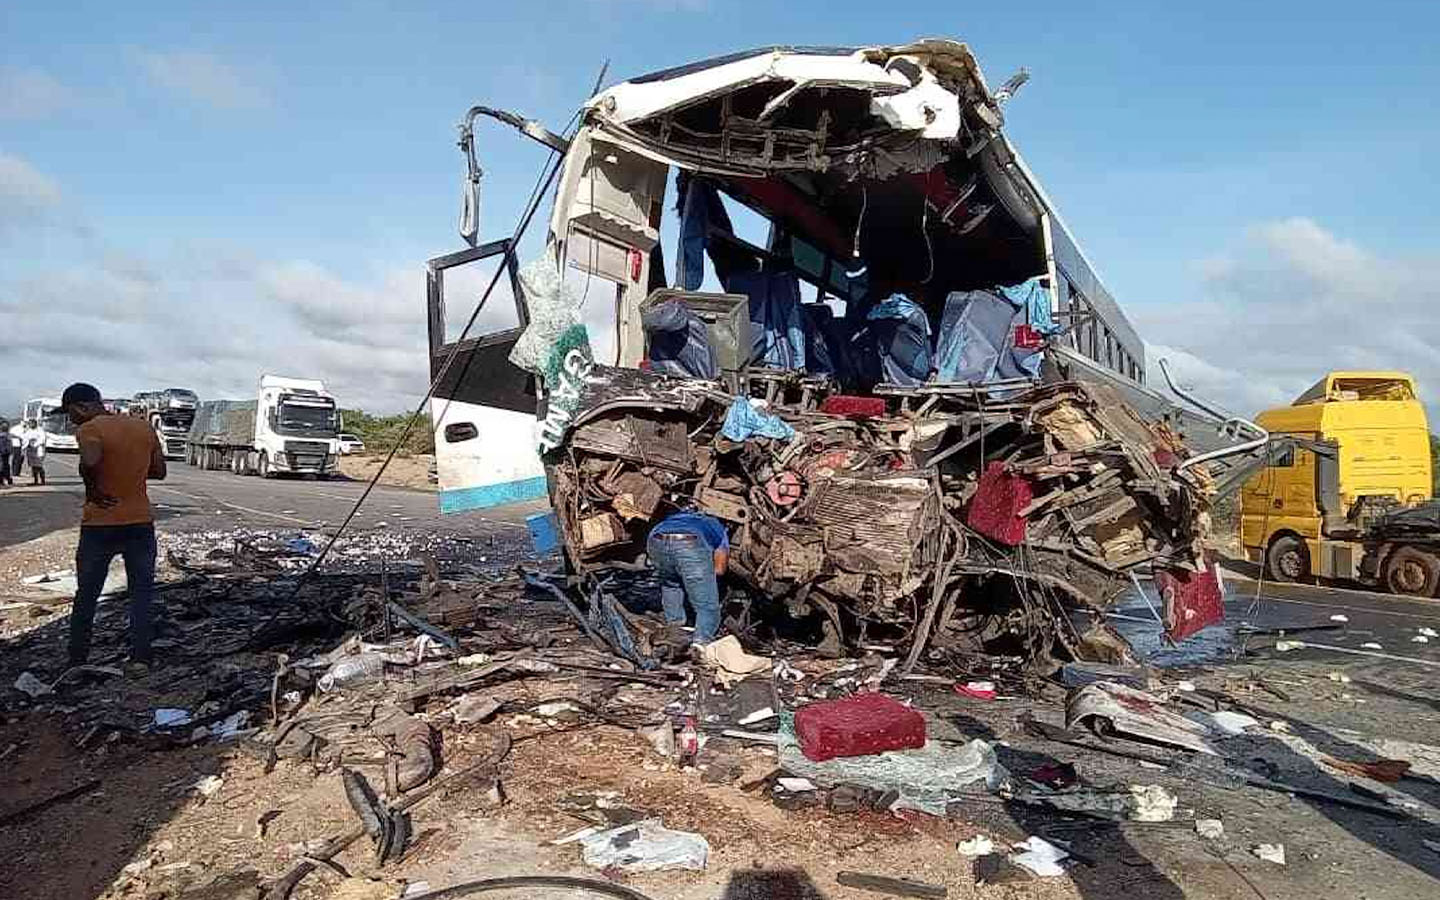 Latest tragedy in Mozambique puts road safety in the spotlight